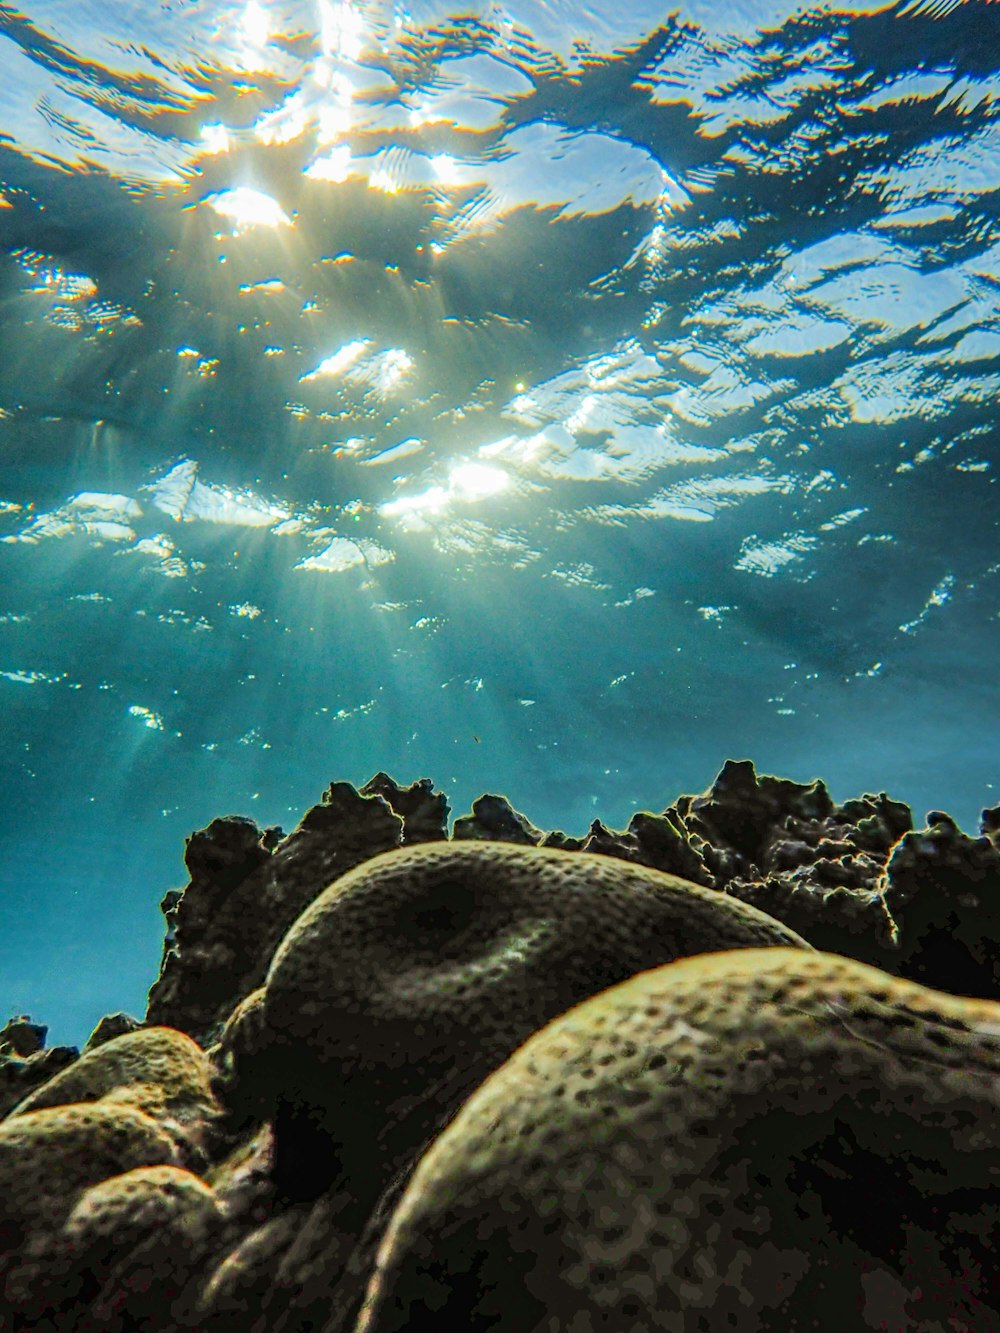 the sun shines through the water over a coral reef